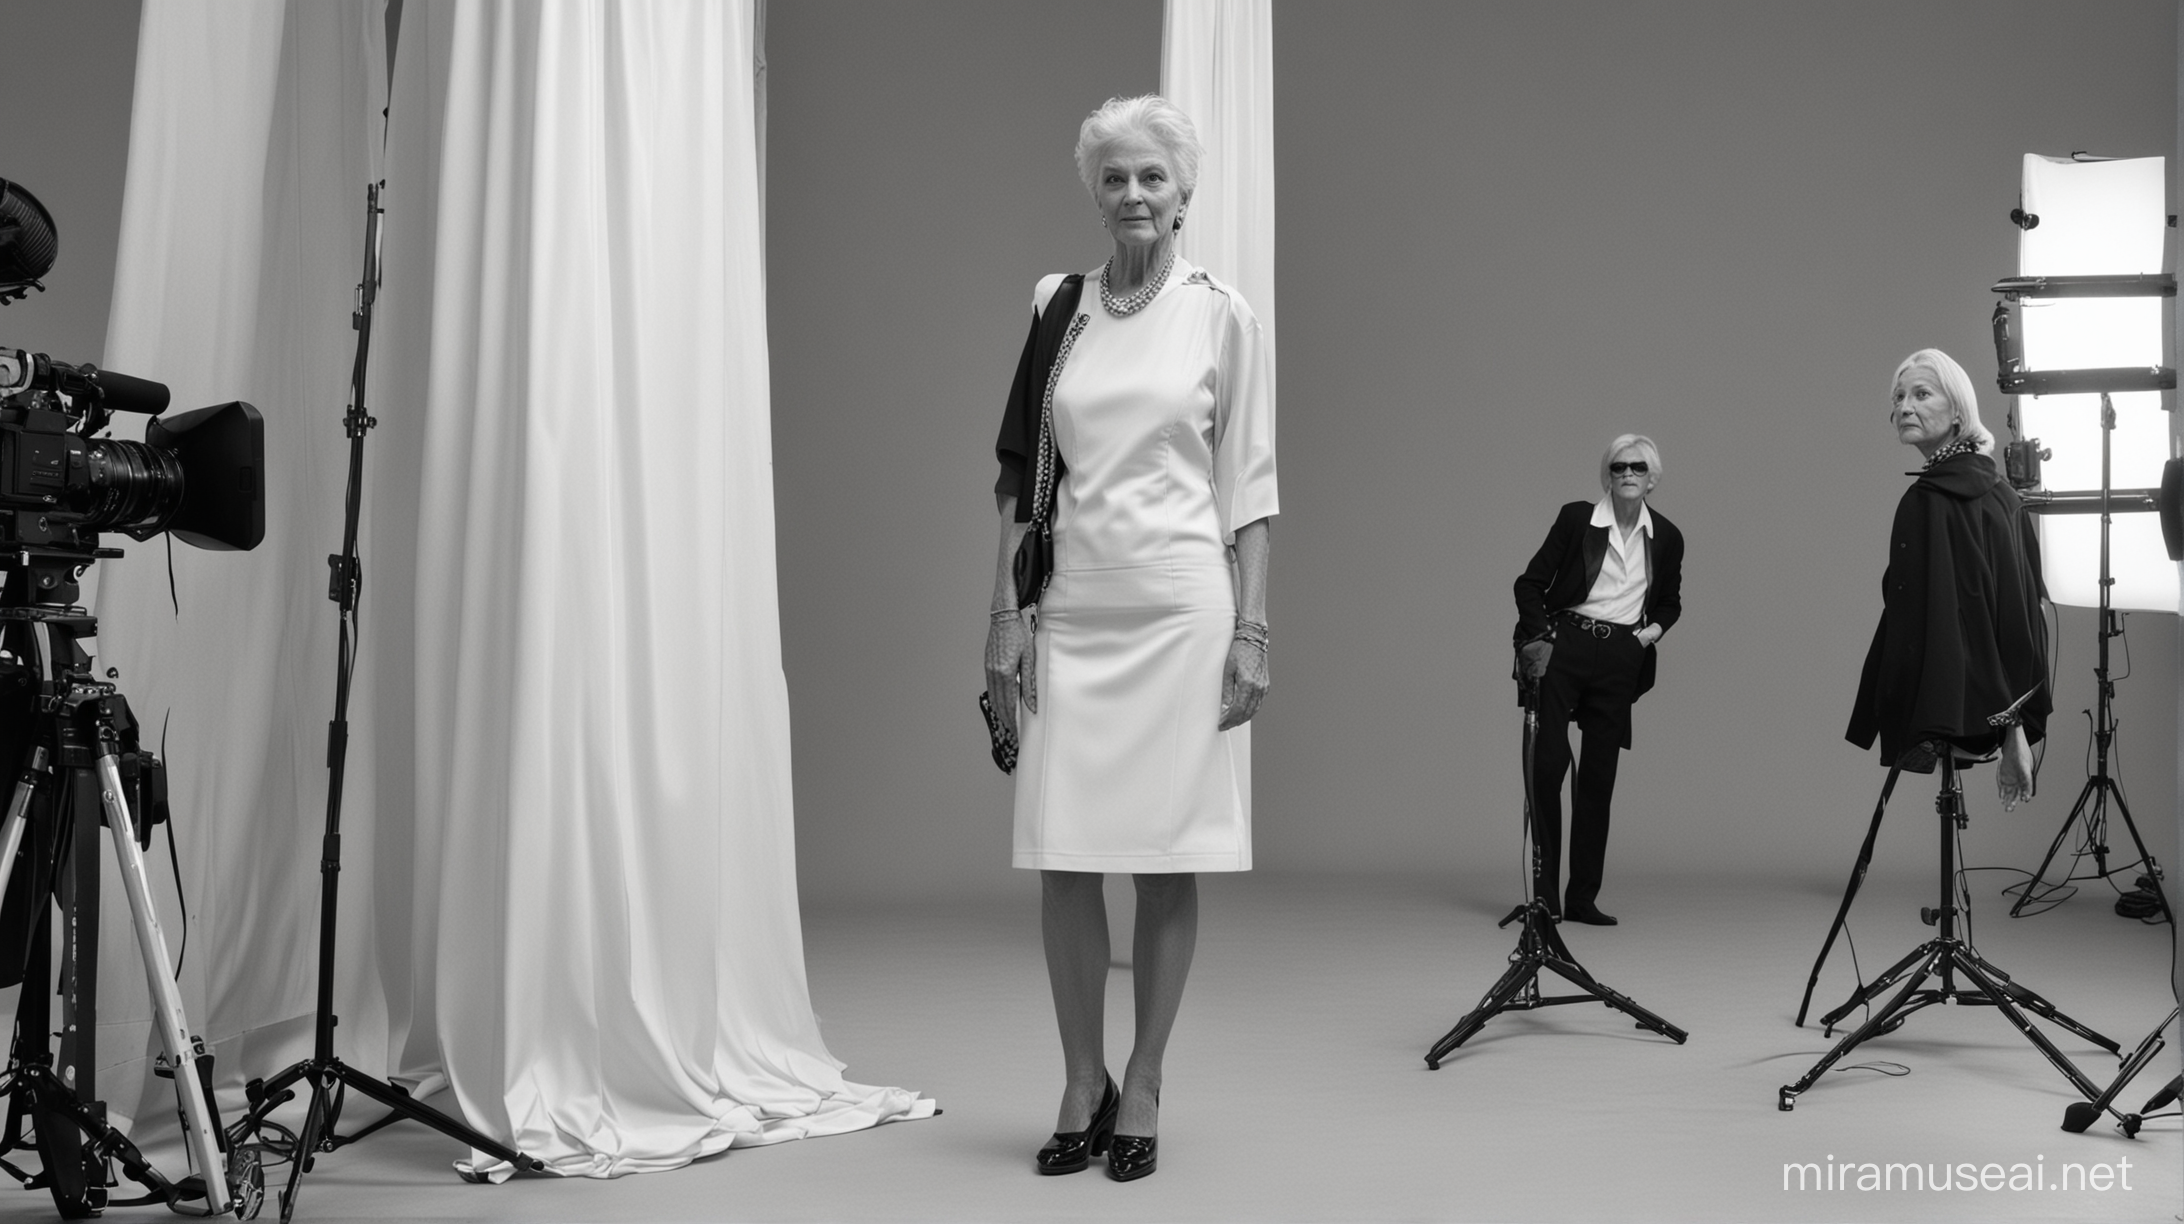 Backstage of a Balenciaga photo shoot with a 70 year old female model.